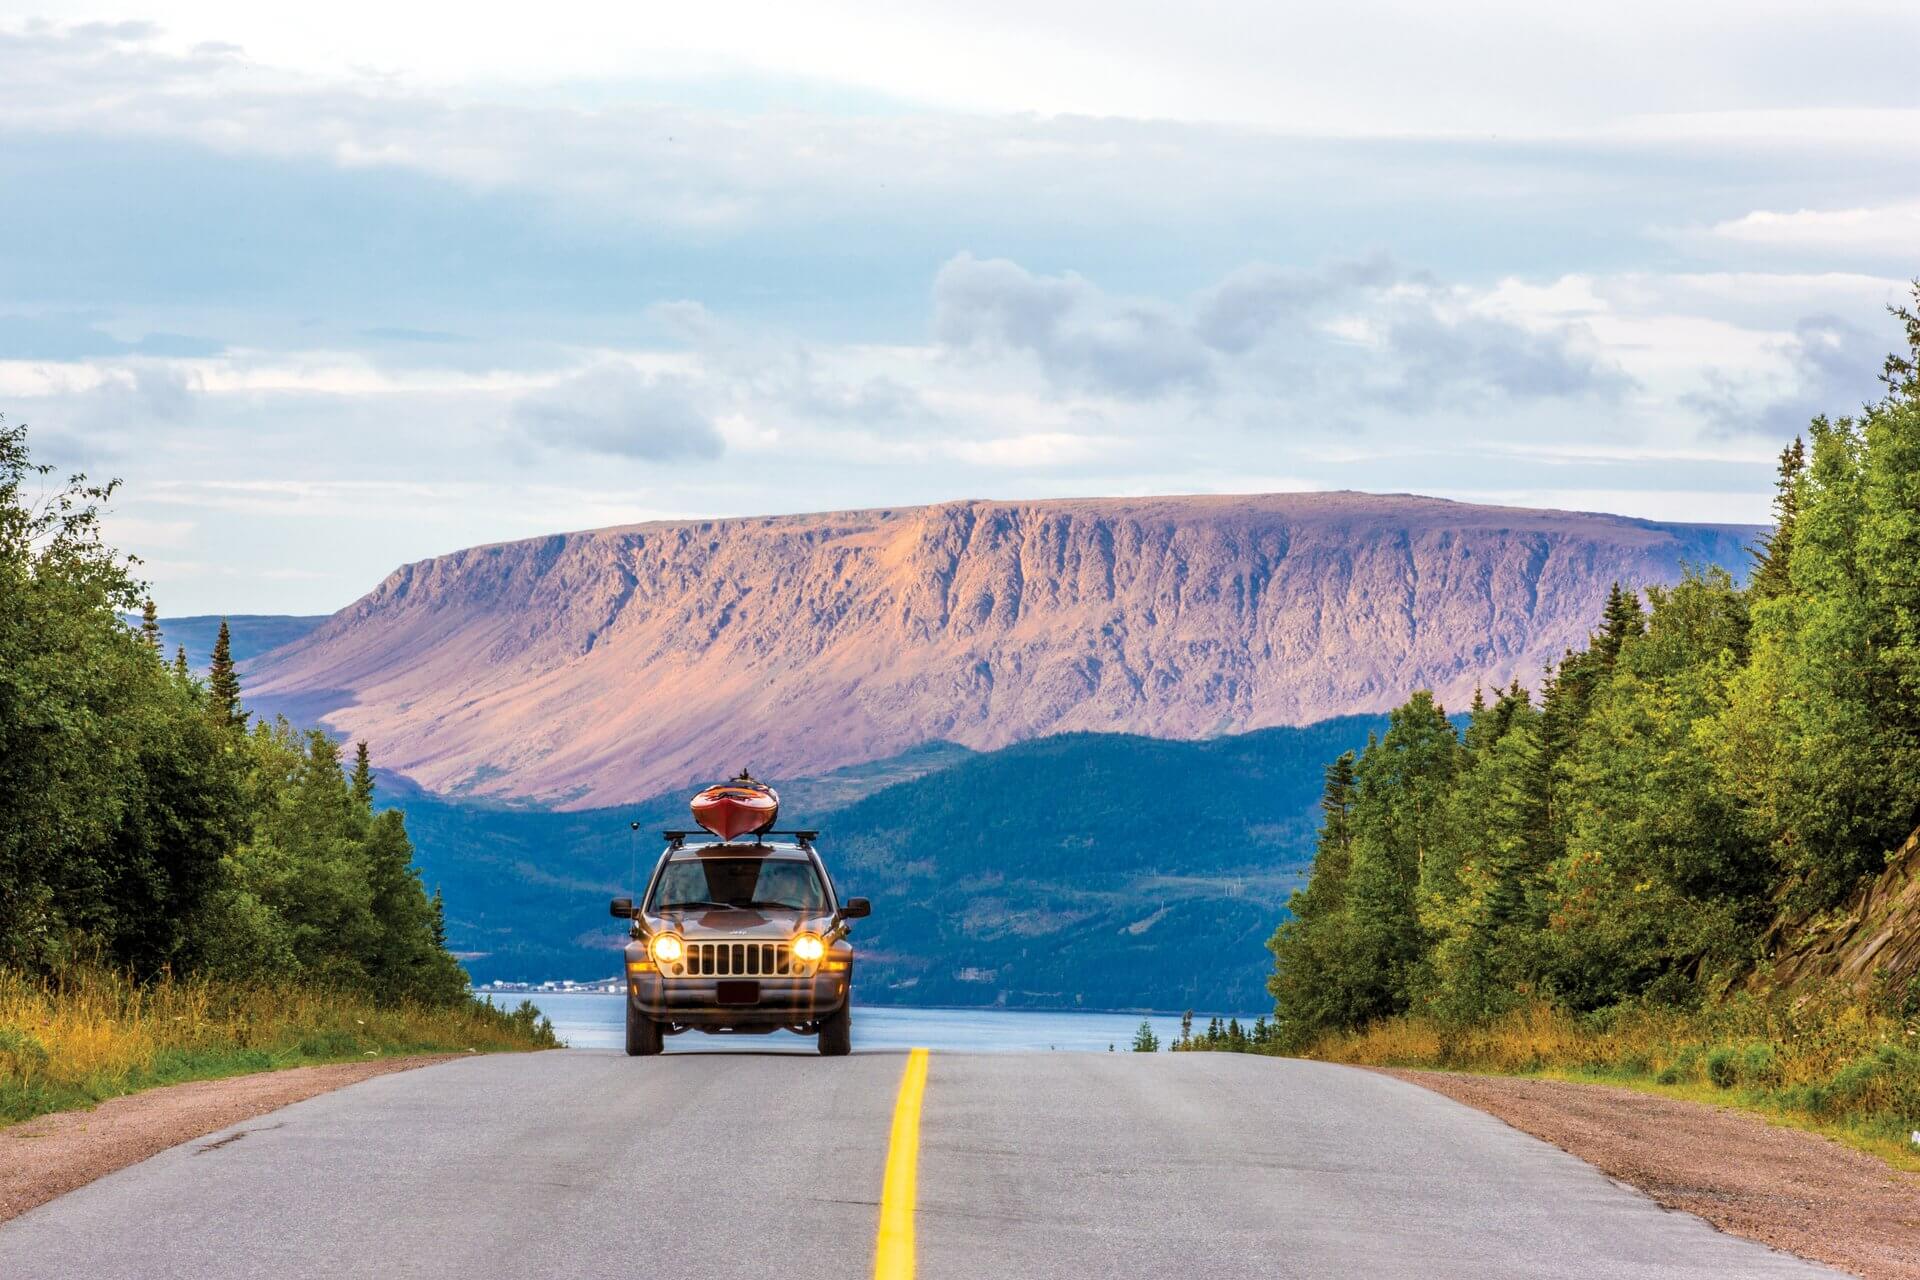 10 Reasons To Put Gros Morne On Your Travel List For 2023